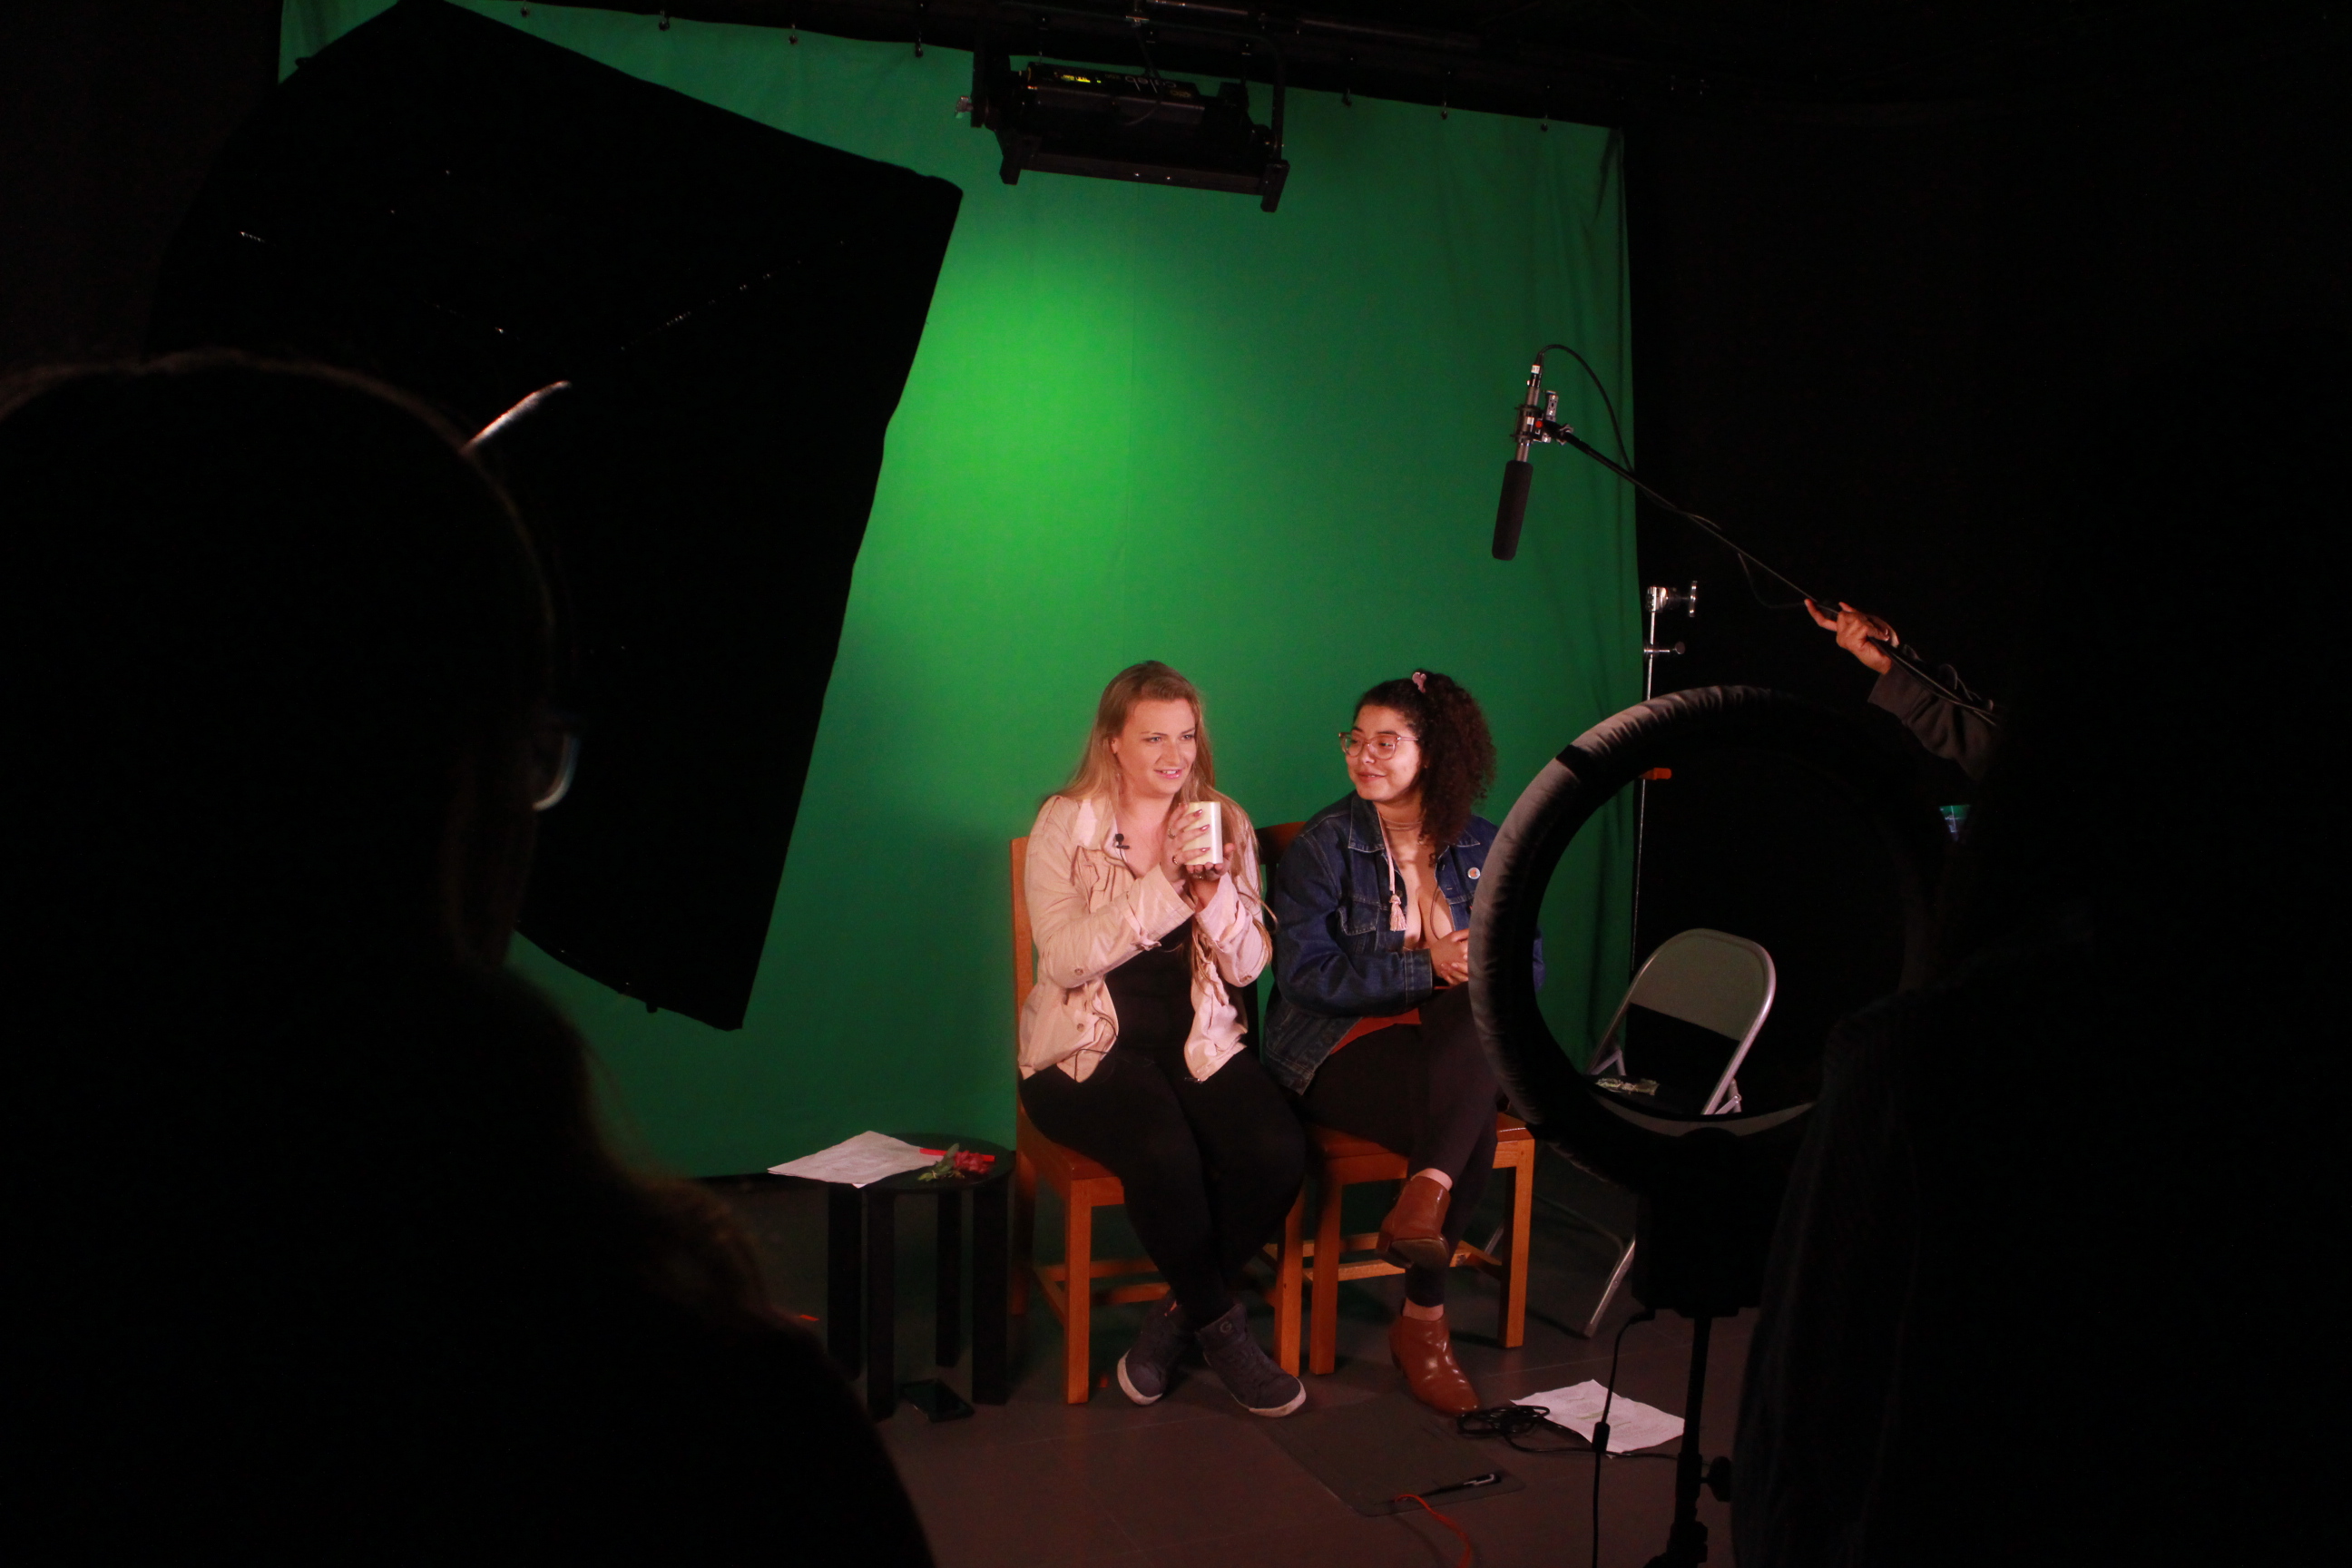 Two students, acting as beauty vloggers, sit on wooden chairs in front of a green screen